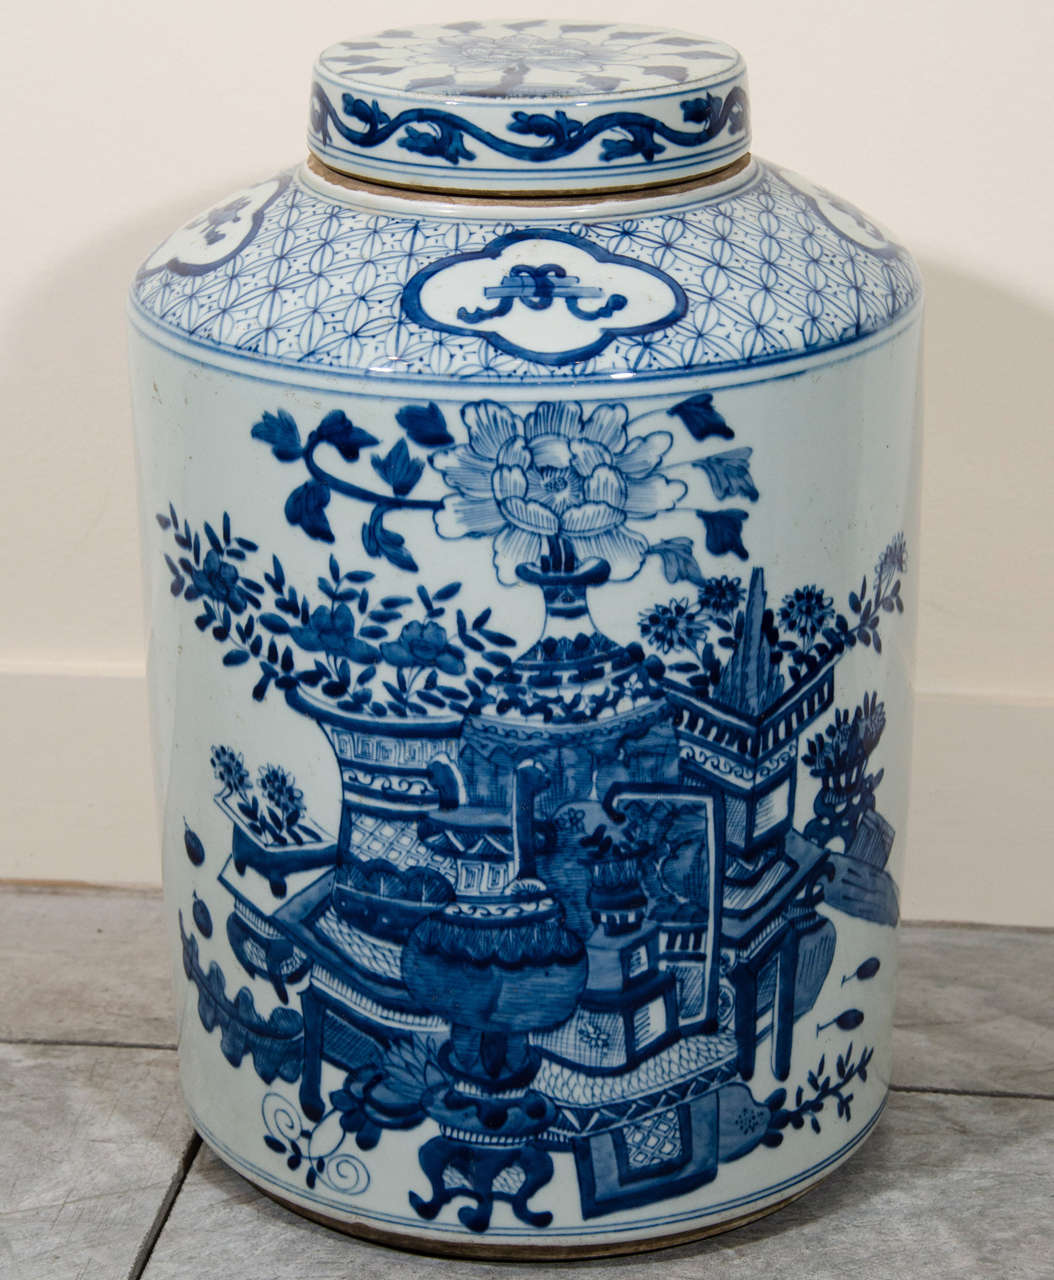 A beautifully decorated antique Chinese porcelain tea container, with Chinese calligraphy on the back. From Shanxi Province, circa 1880.